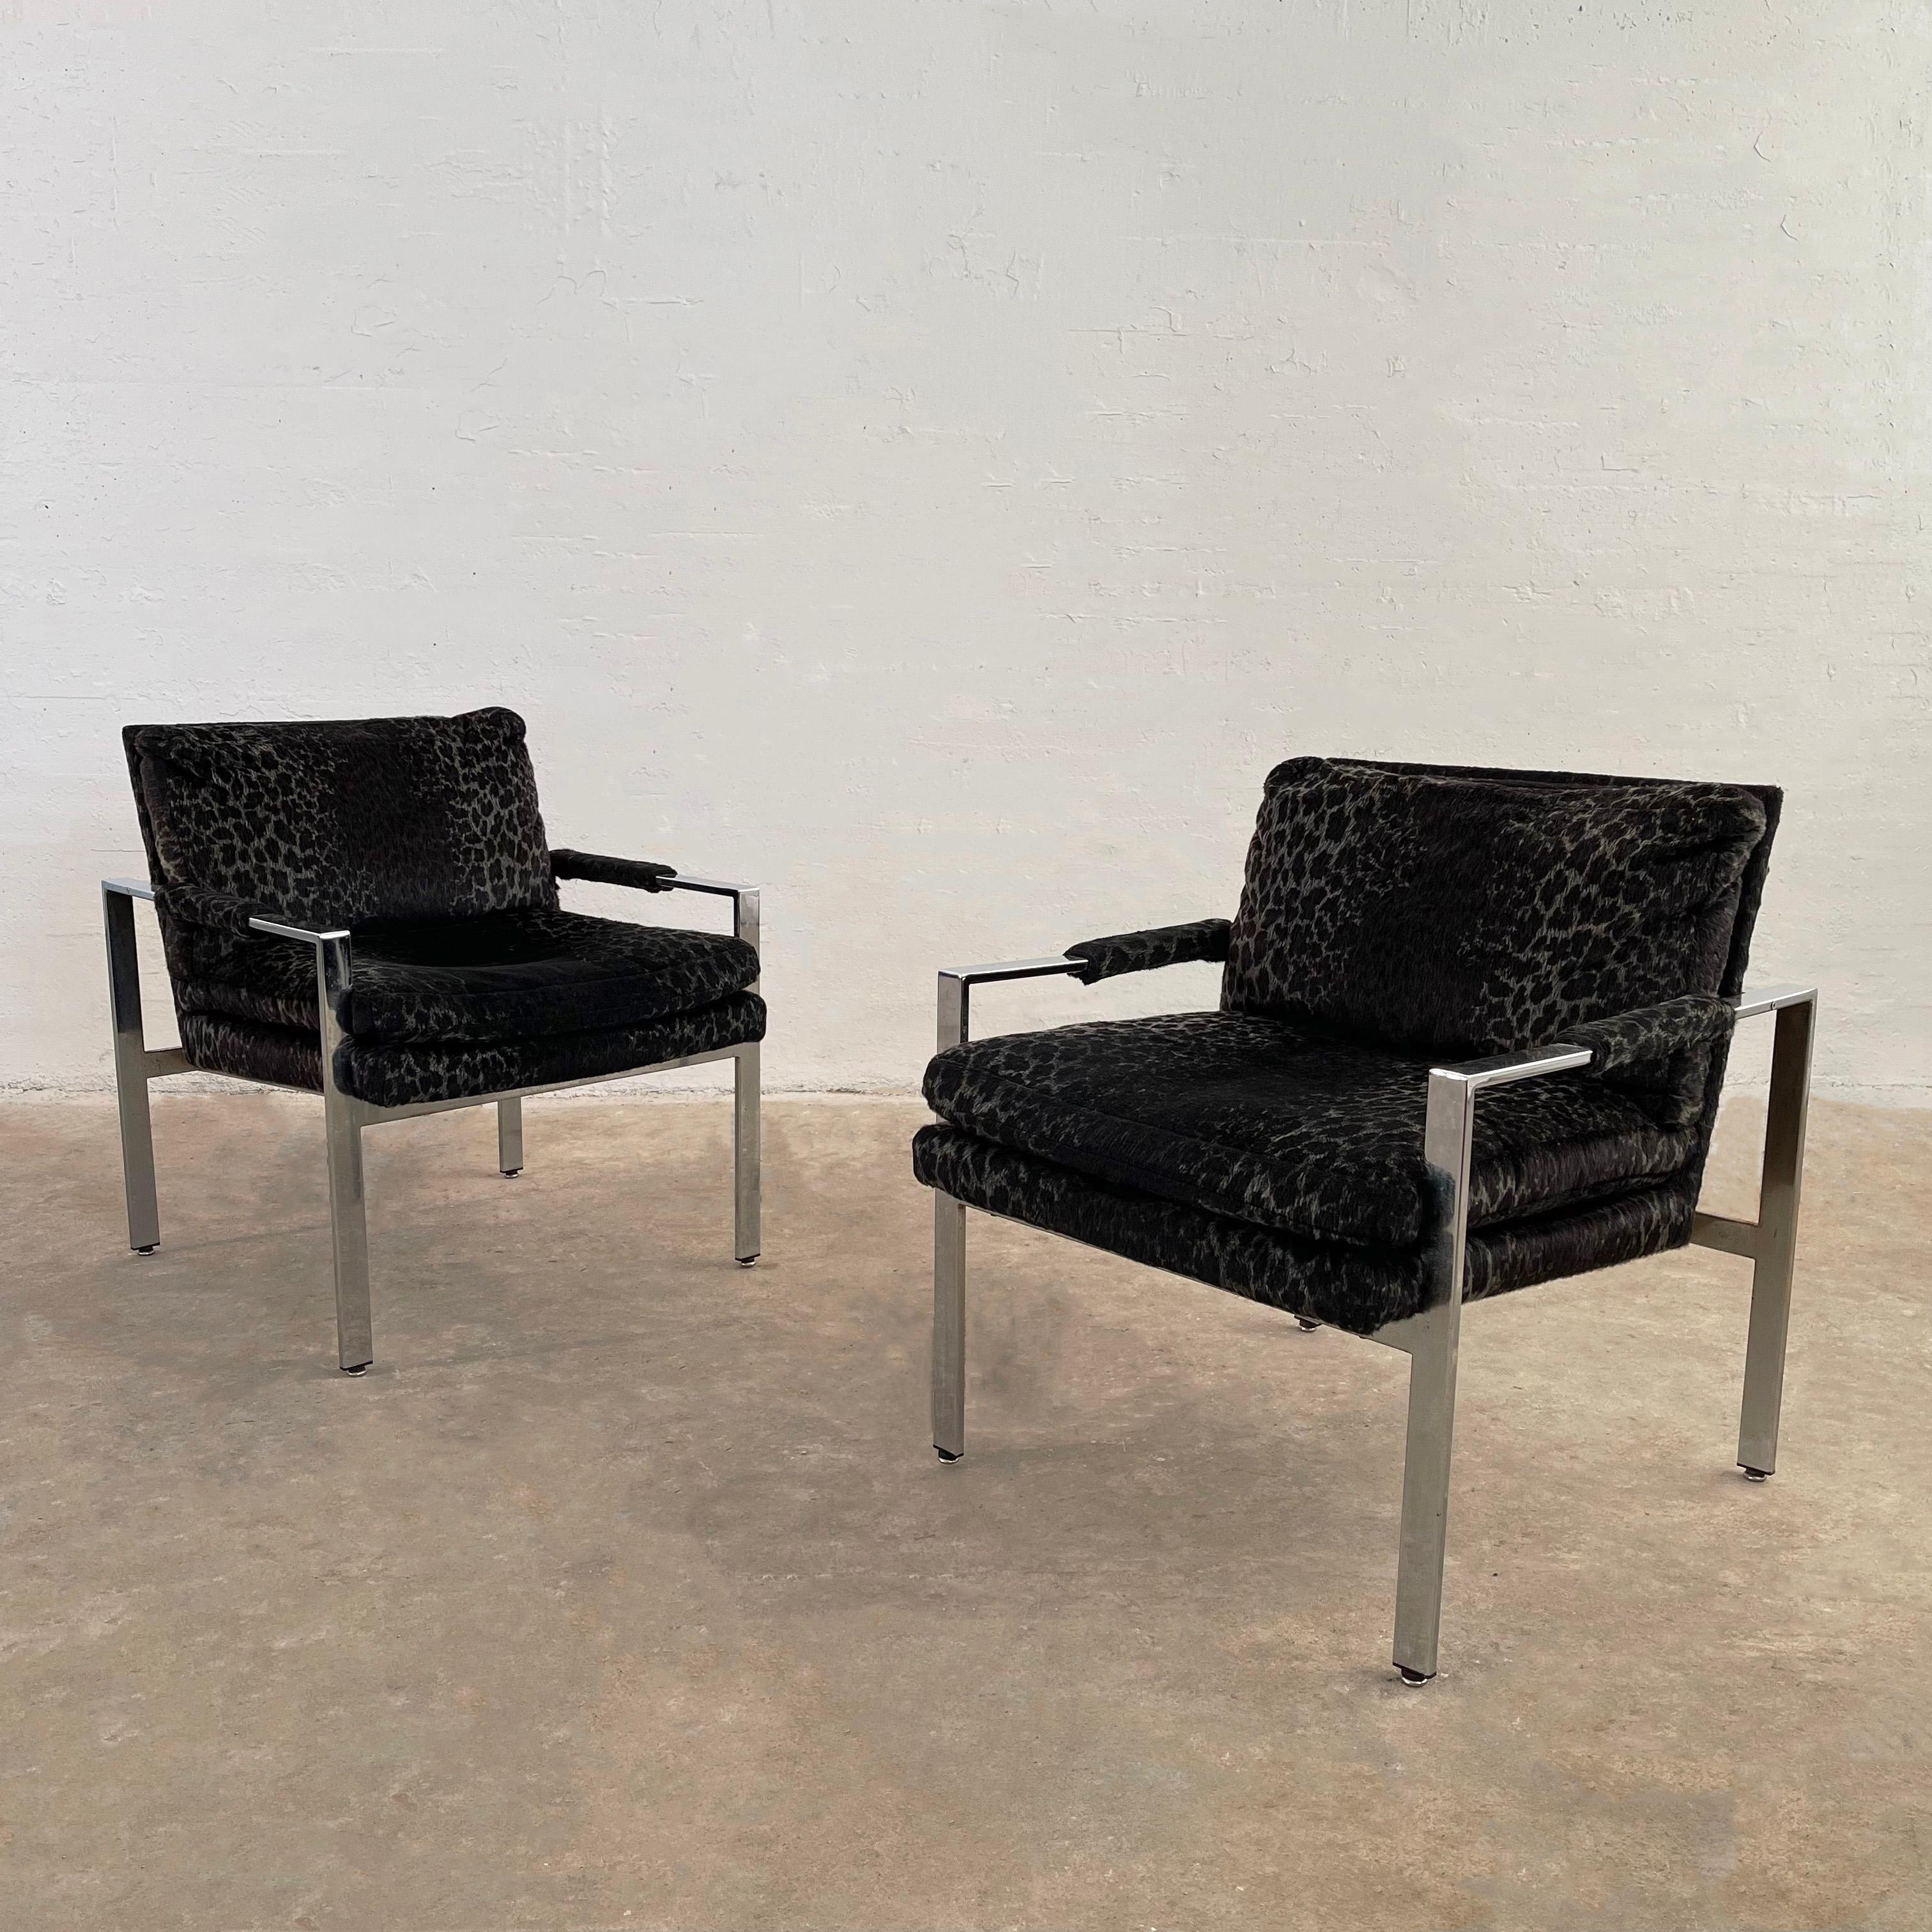 Pair of mid-century modern, lounge chairs by Milo Baughman for Thayer Coggin feature flat bar chrome, cube frames with black and gray leopard print velvet upholstery. These minimal chrome chairs are iconic Baughman design that are sleek from every